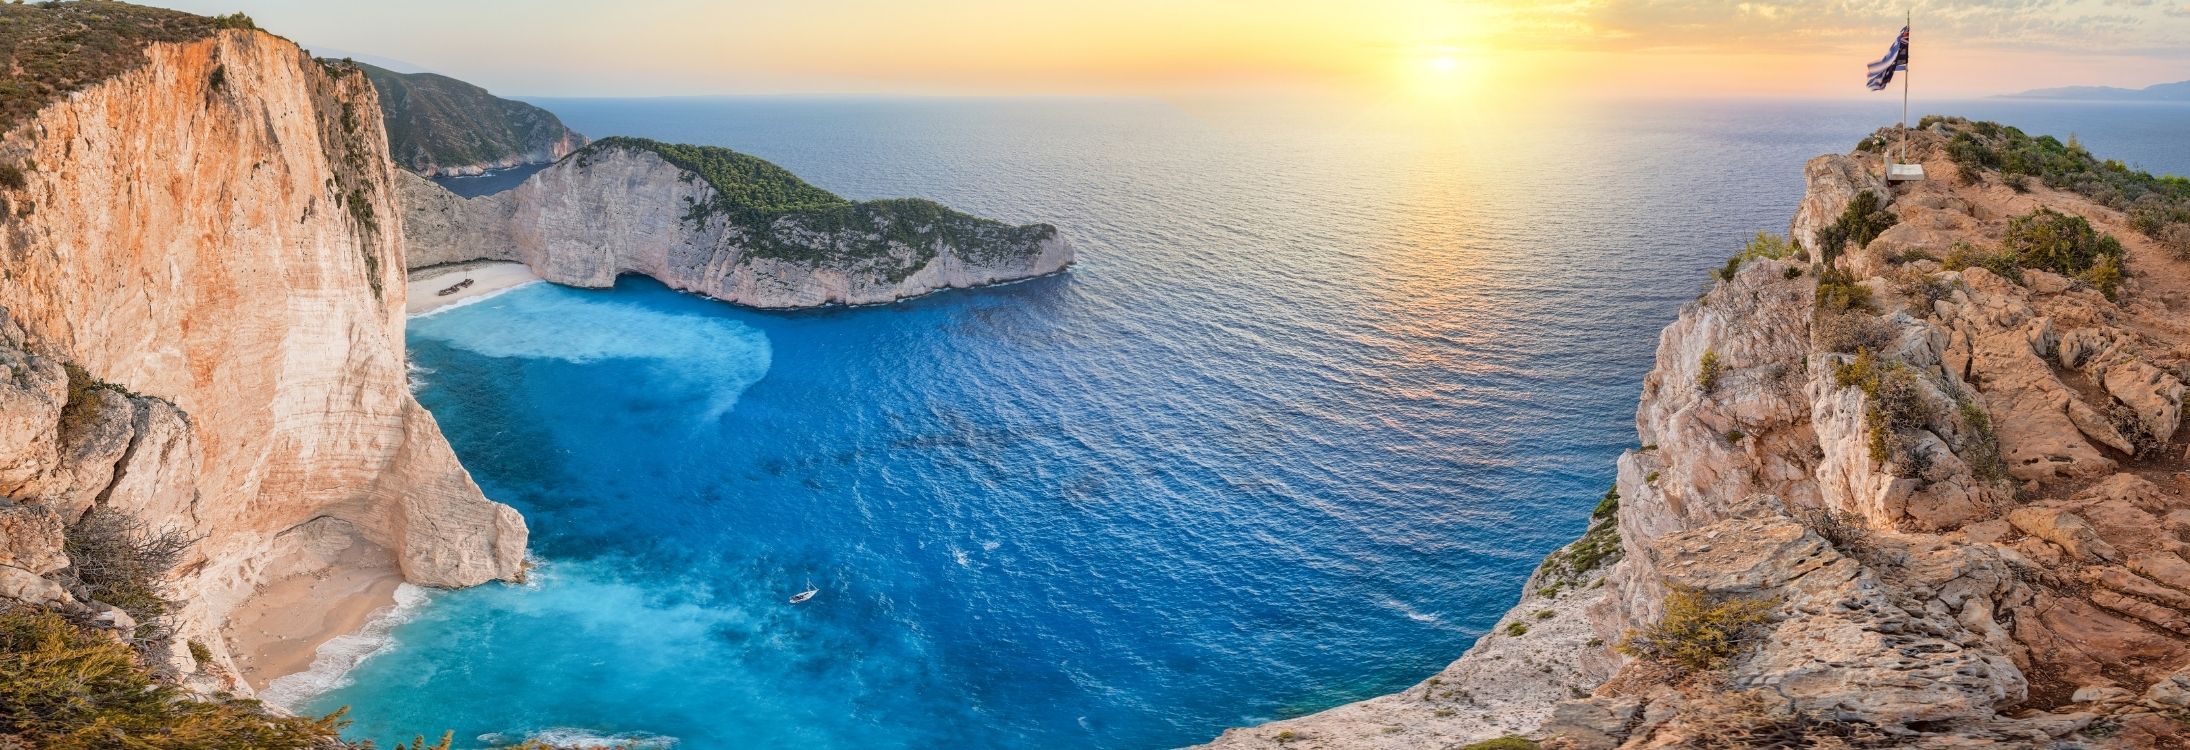 Discover the secrets of the secluded beach of Navagio in Greece